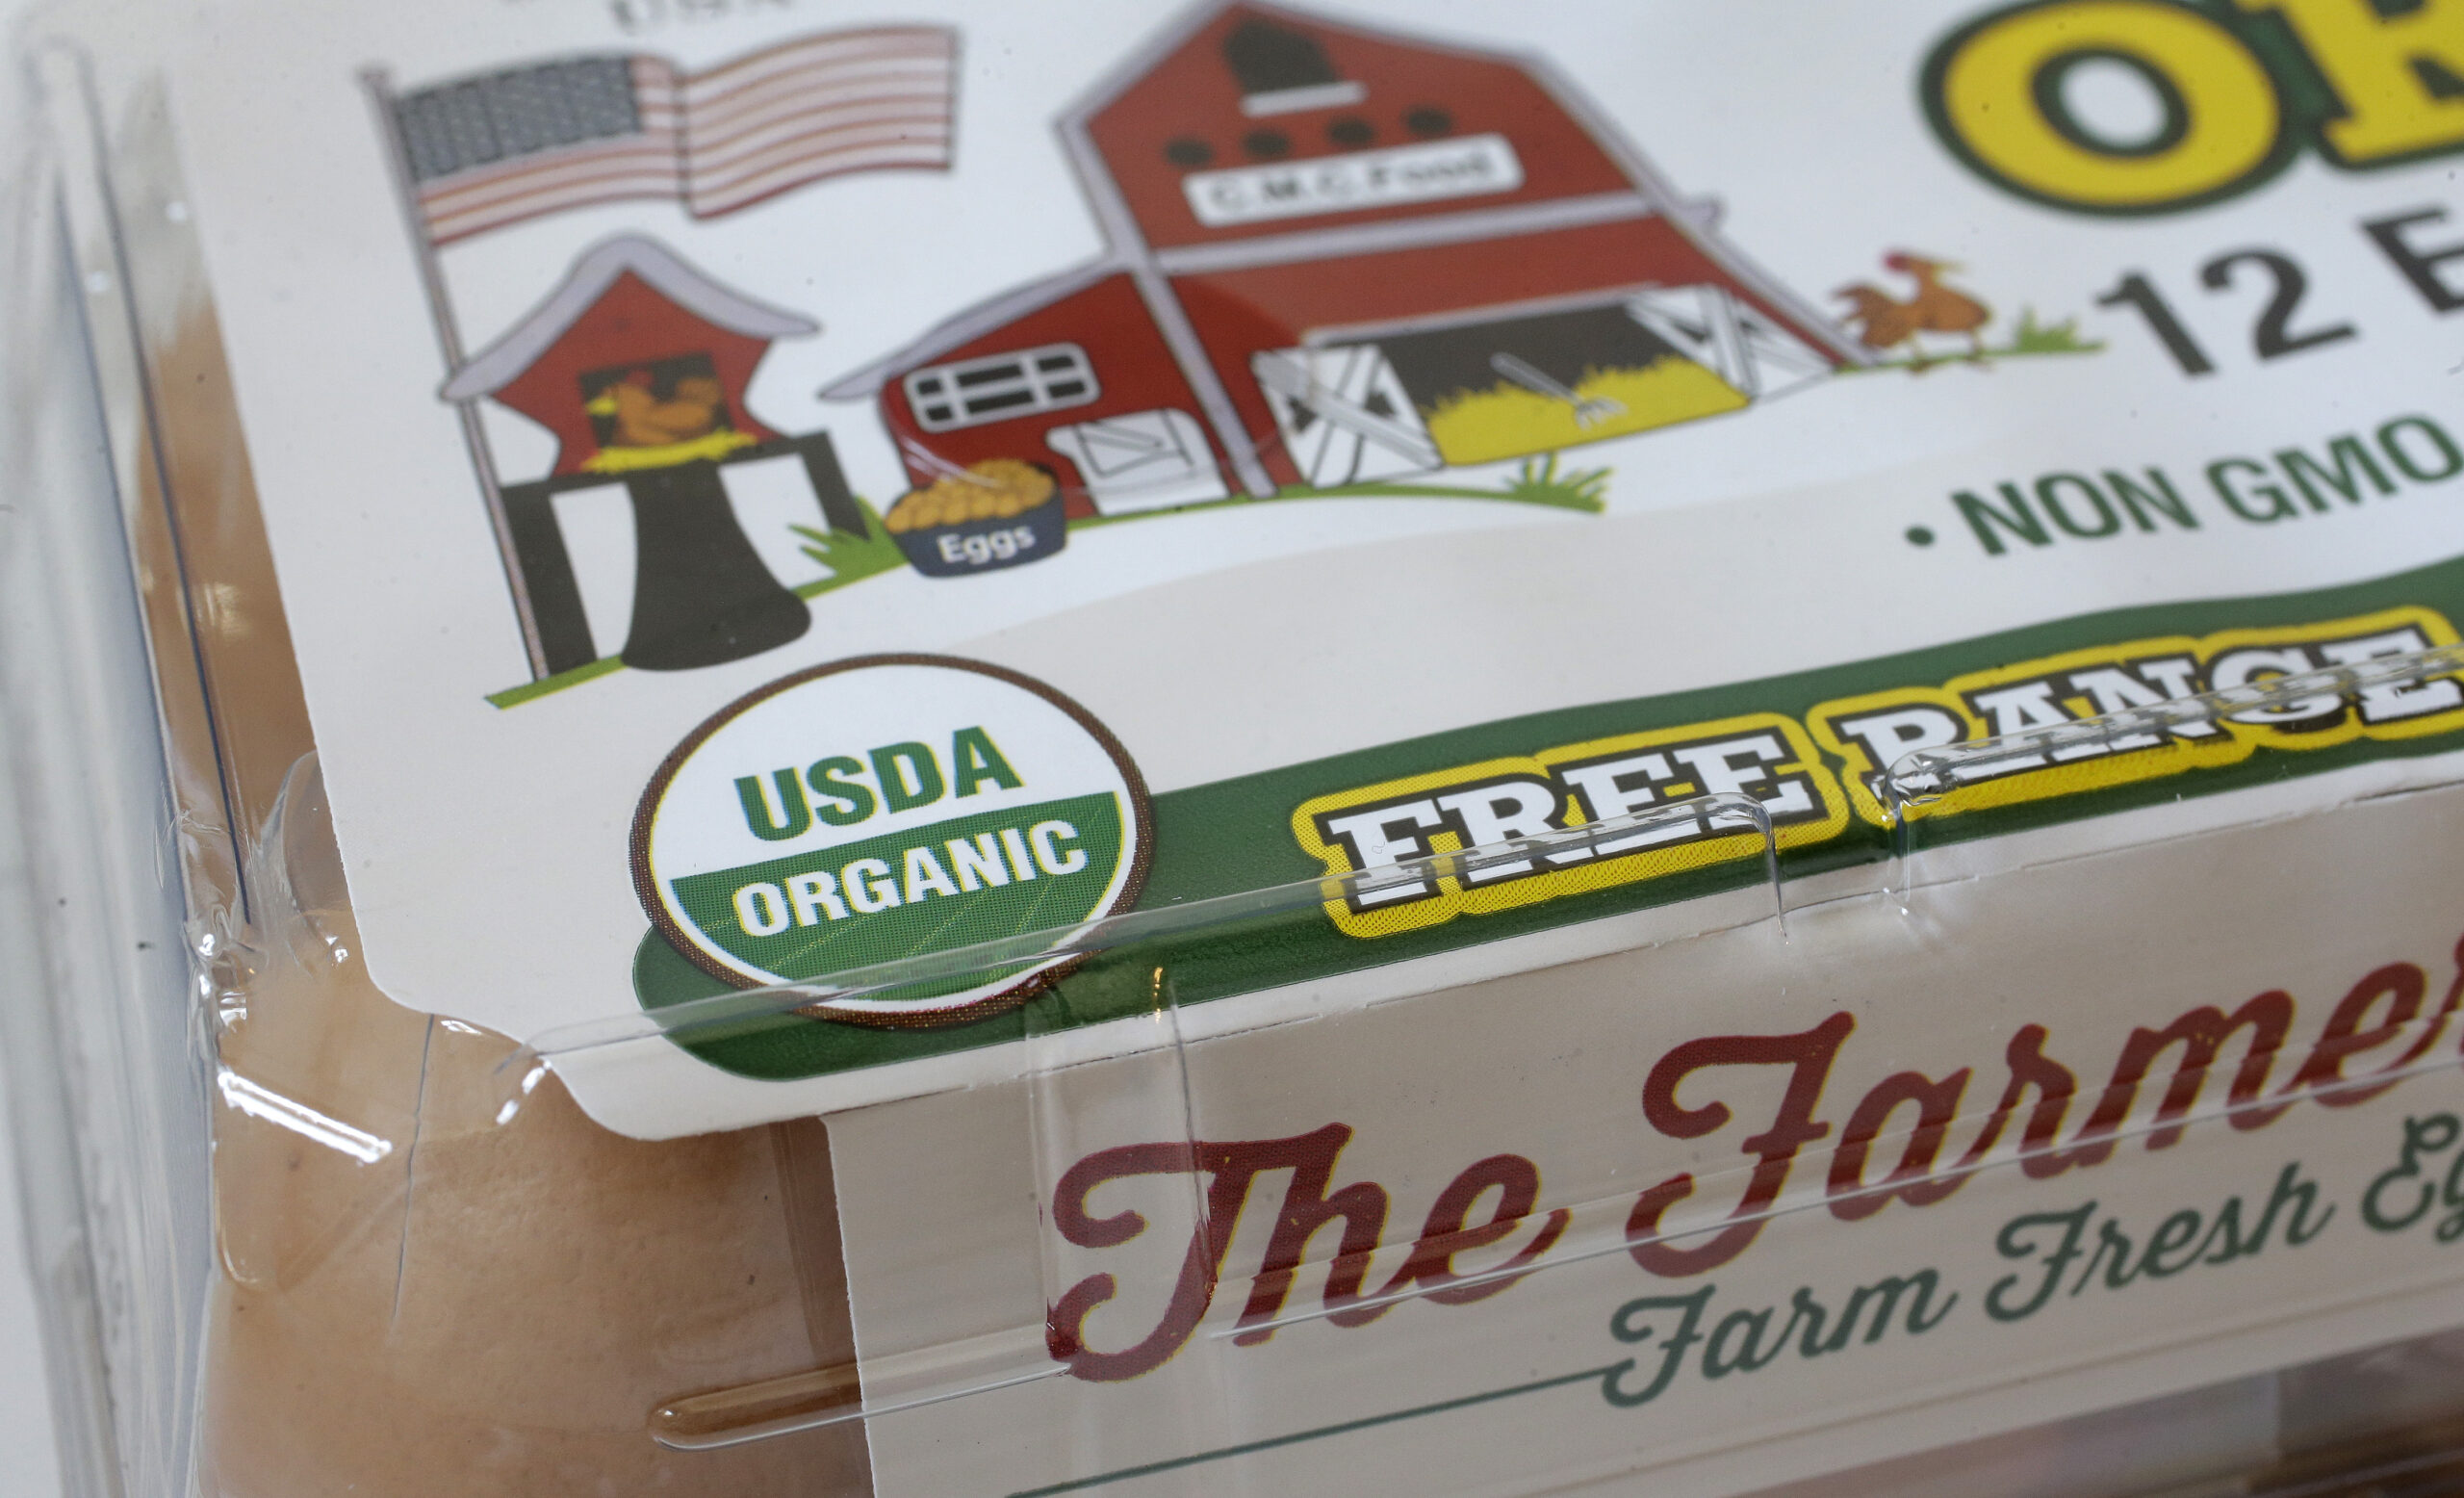 "USDA Organic" label is printed on the label of a carton of a dozen eggs